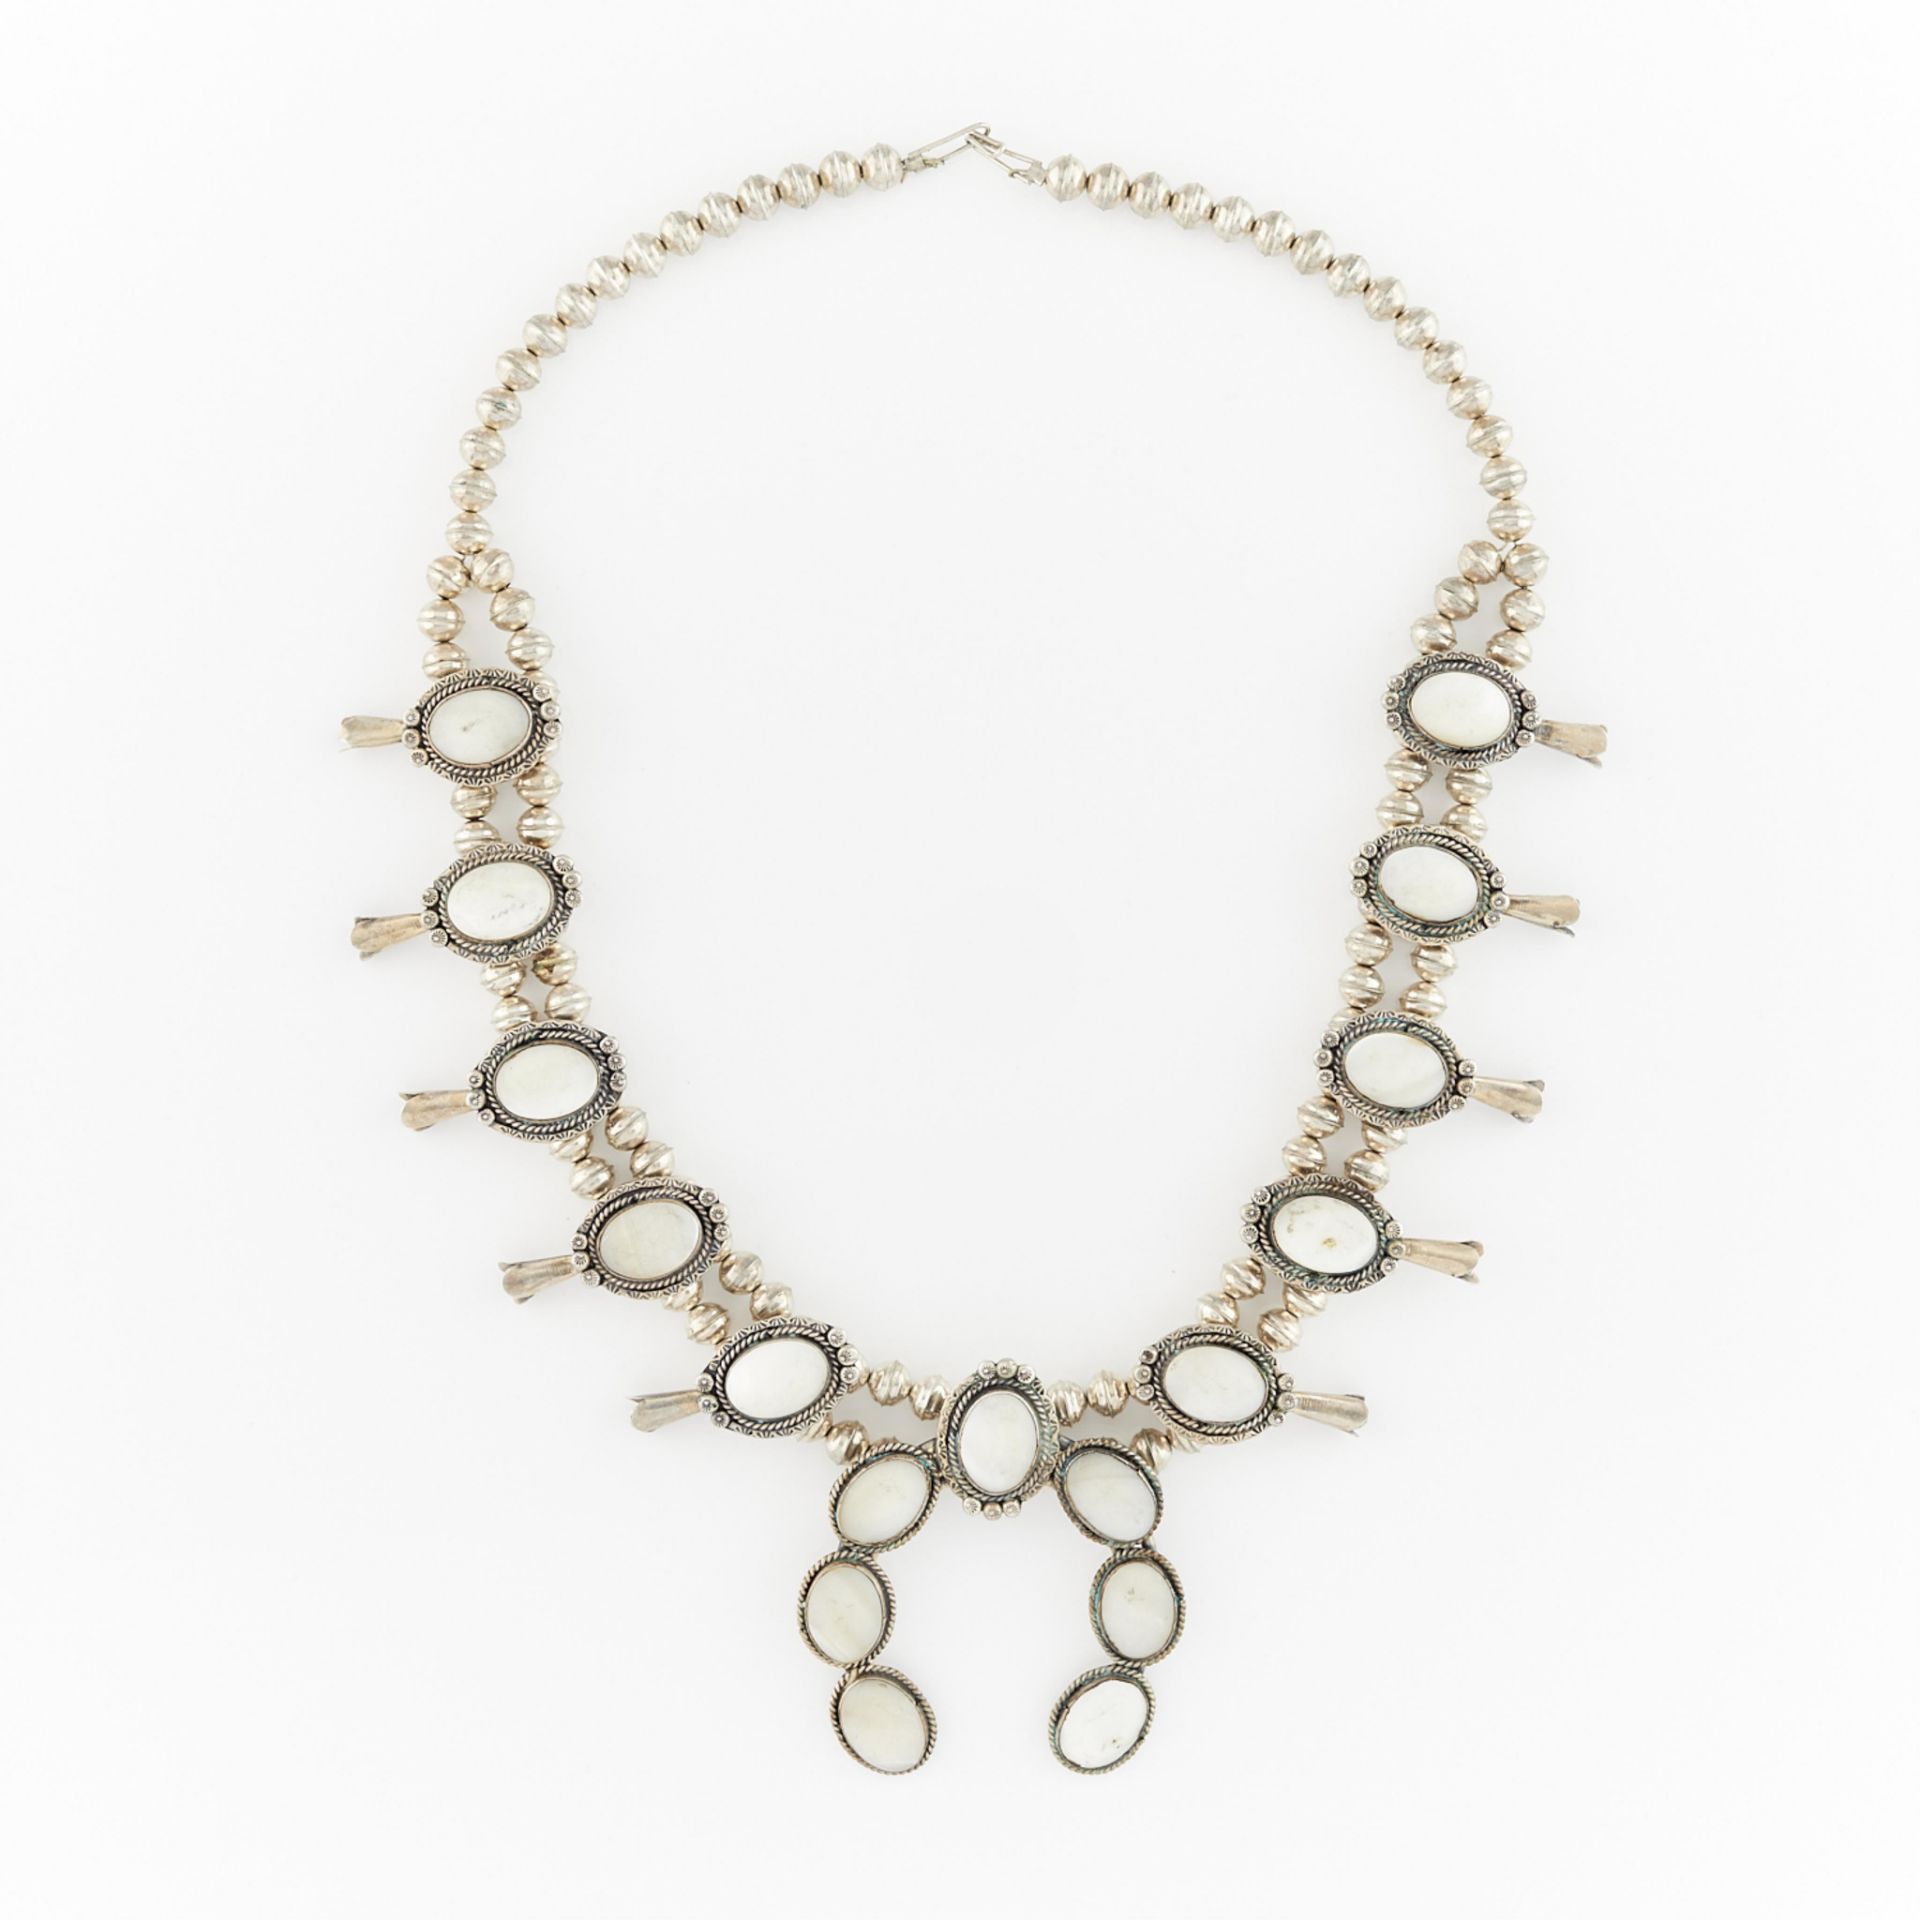 Shell Squash Blossom Necklace - Image 3 of 6